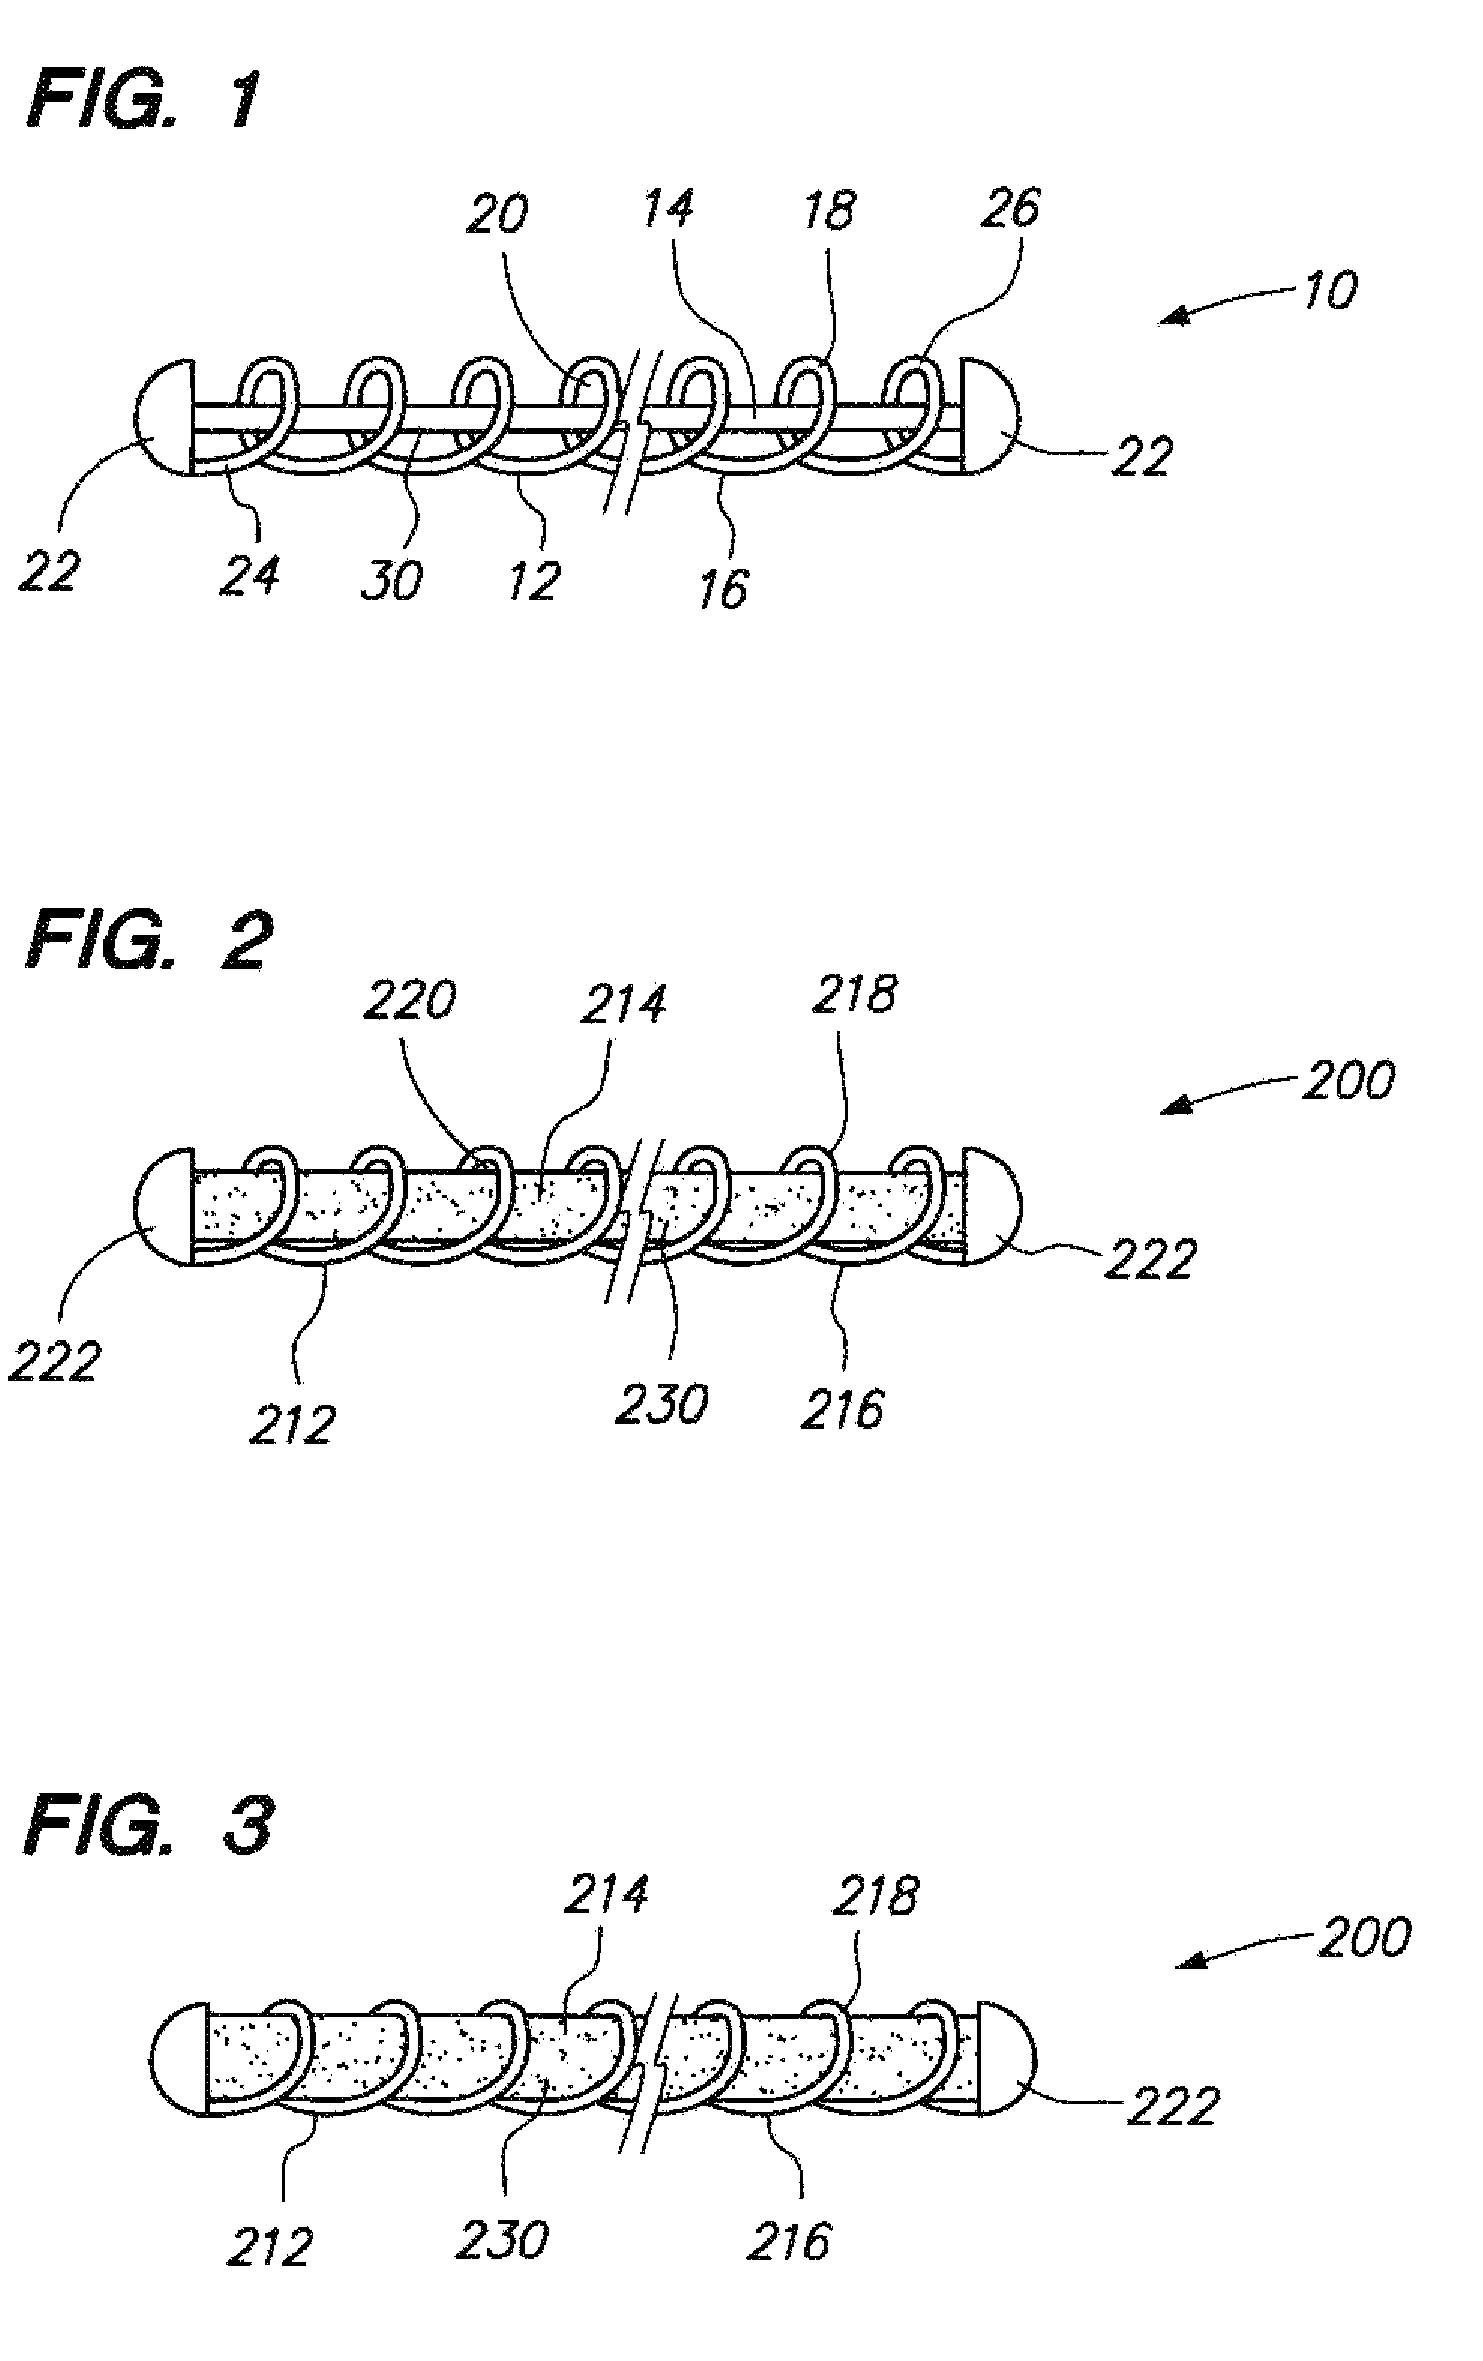 Vaso-occlusive devices with in-situ stiffening elements